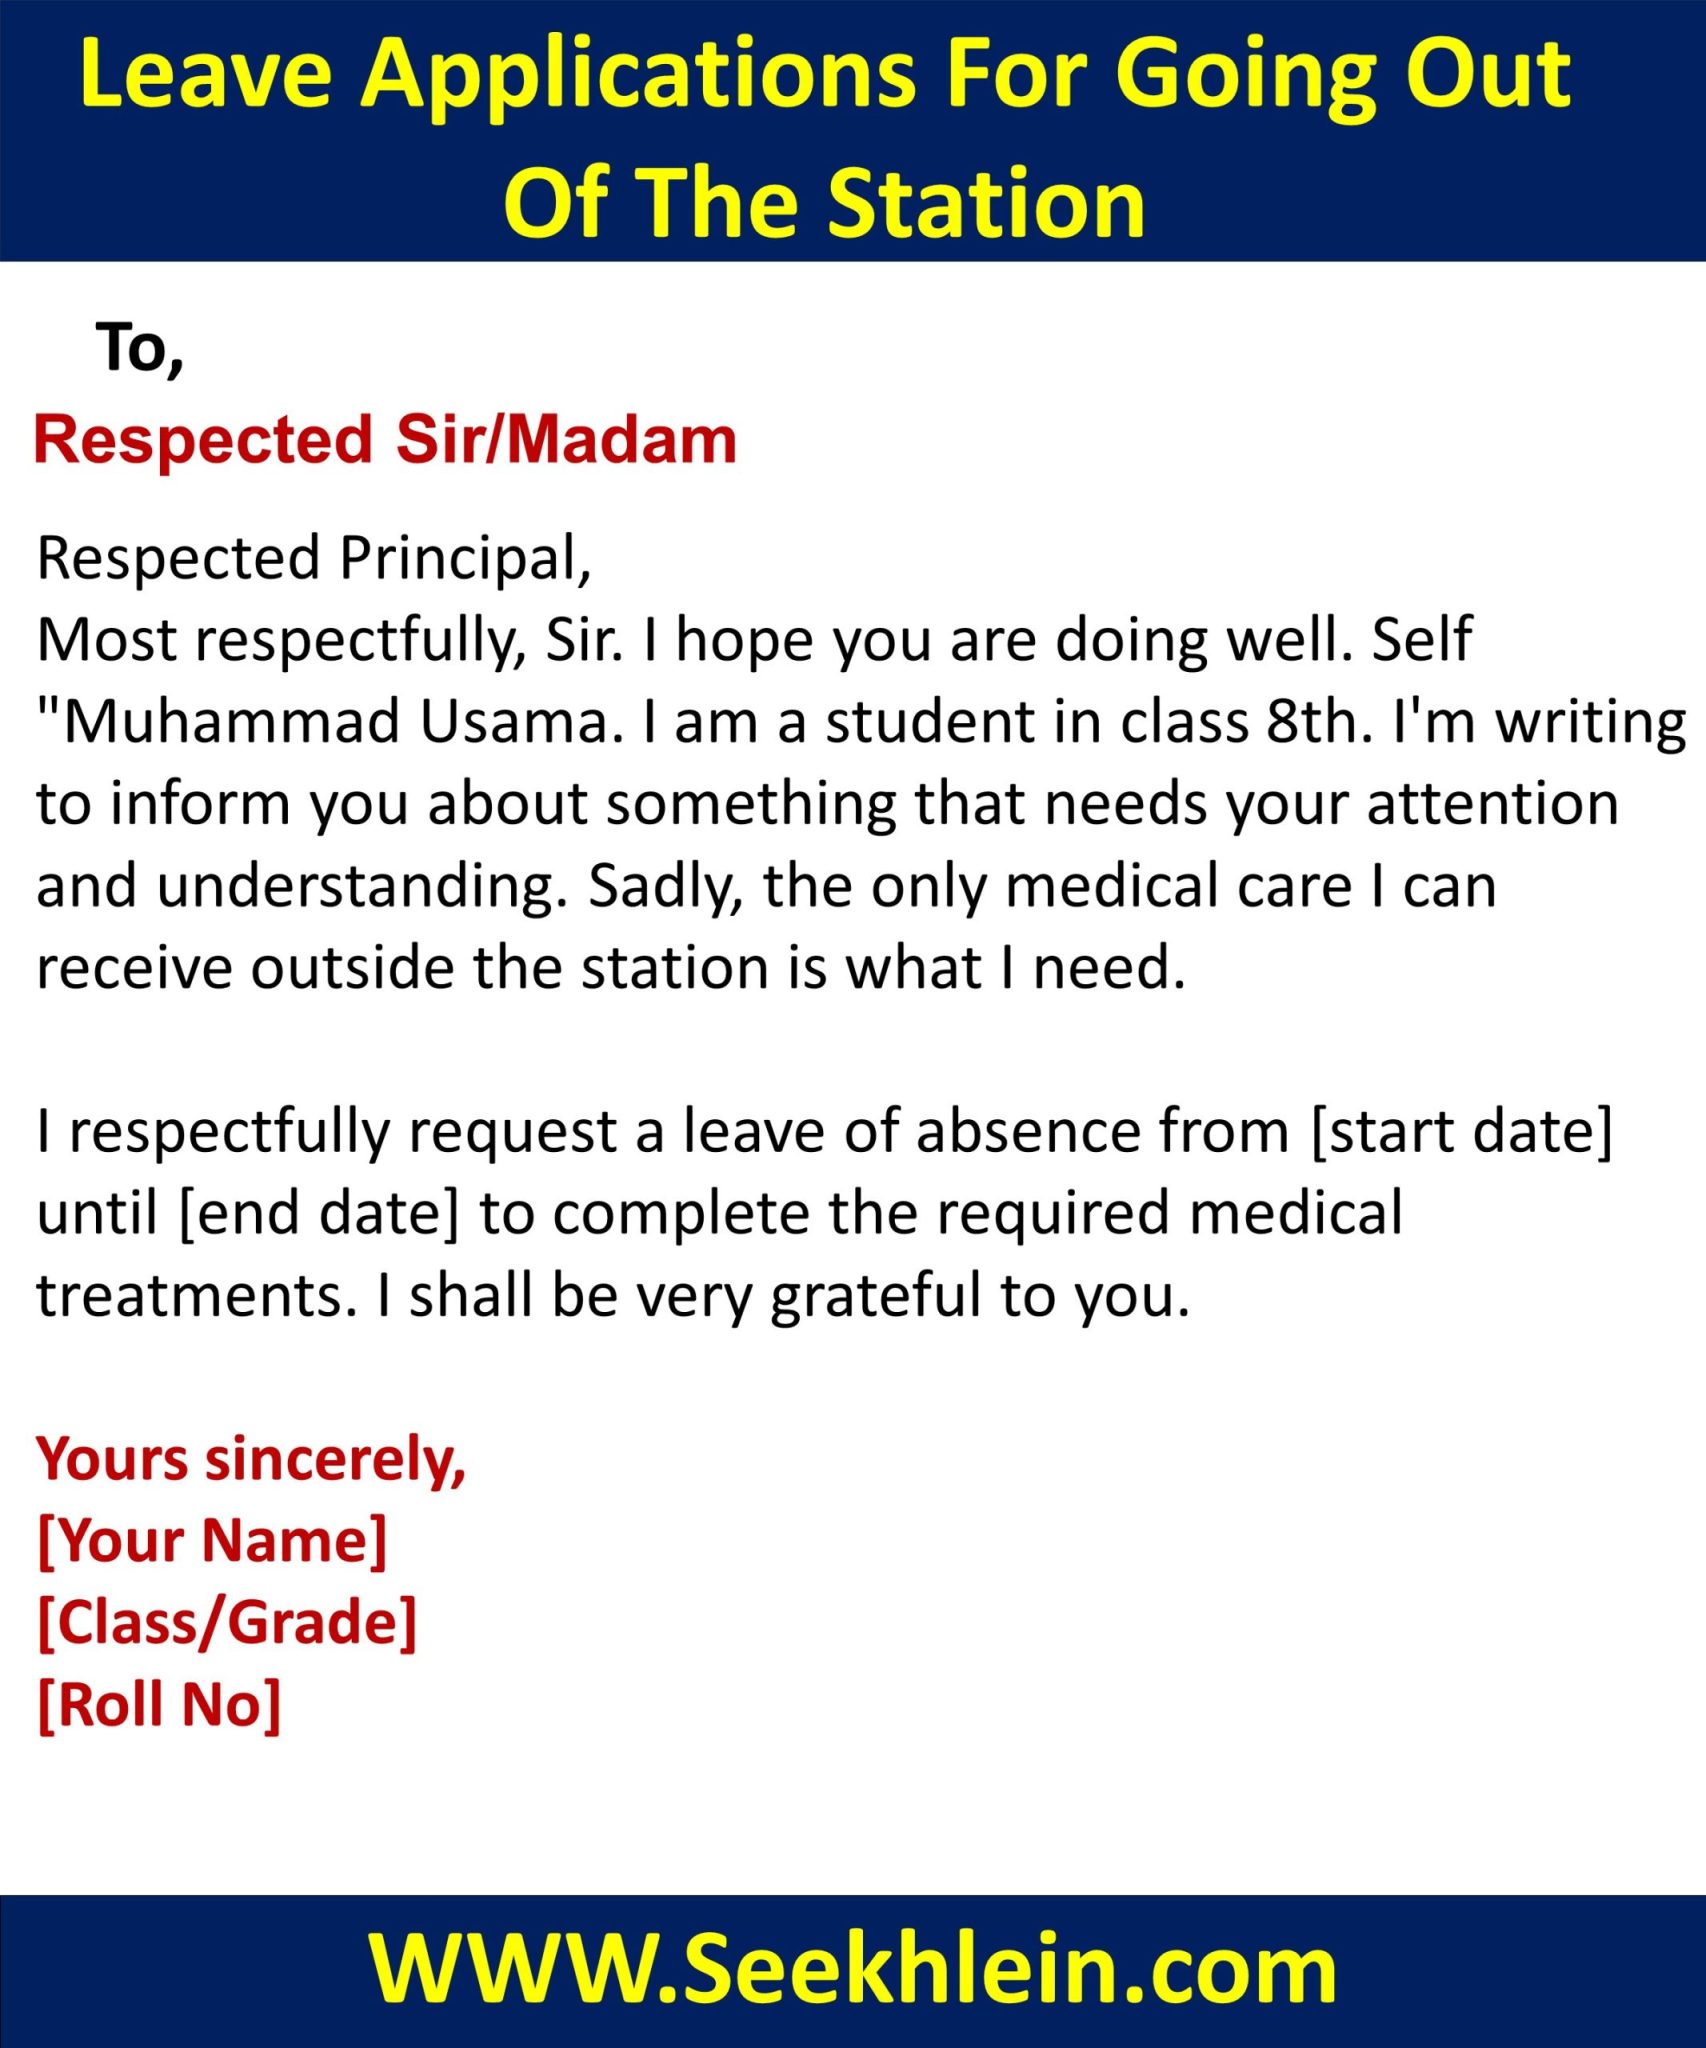 Leave Application To Principal For Going Out Of Station For Medical Treatment